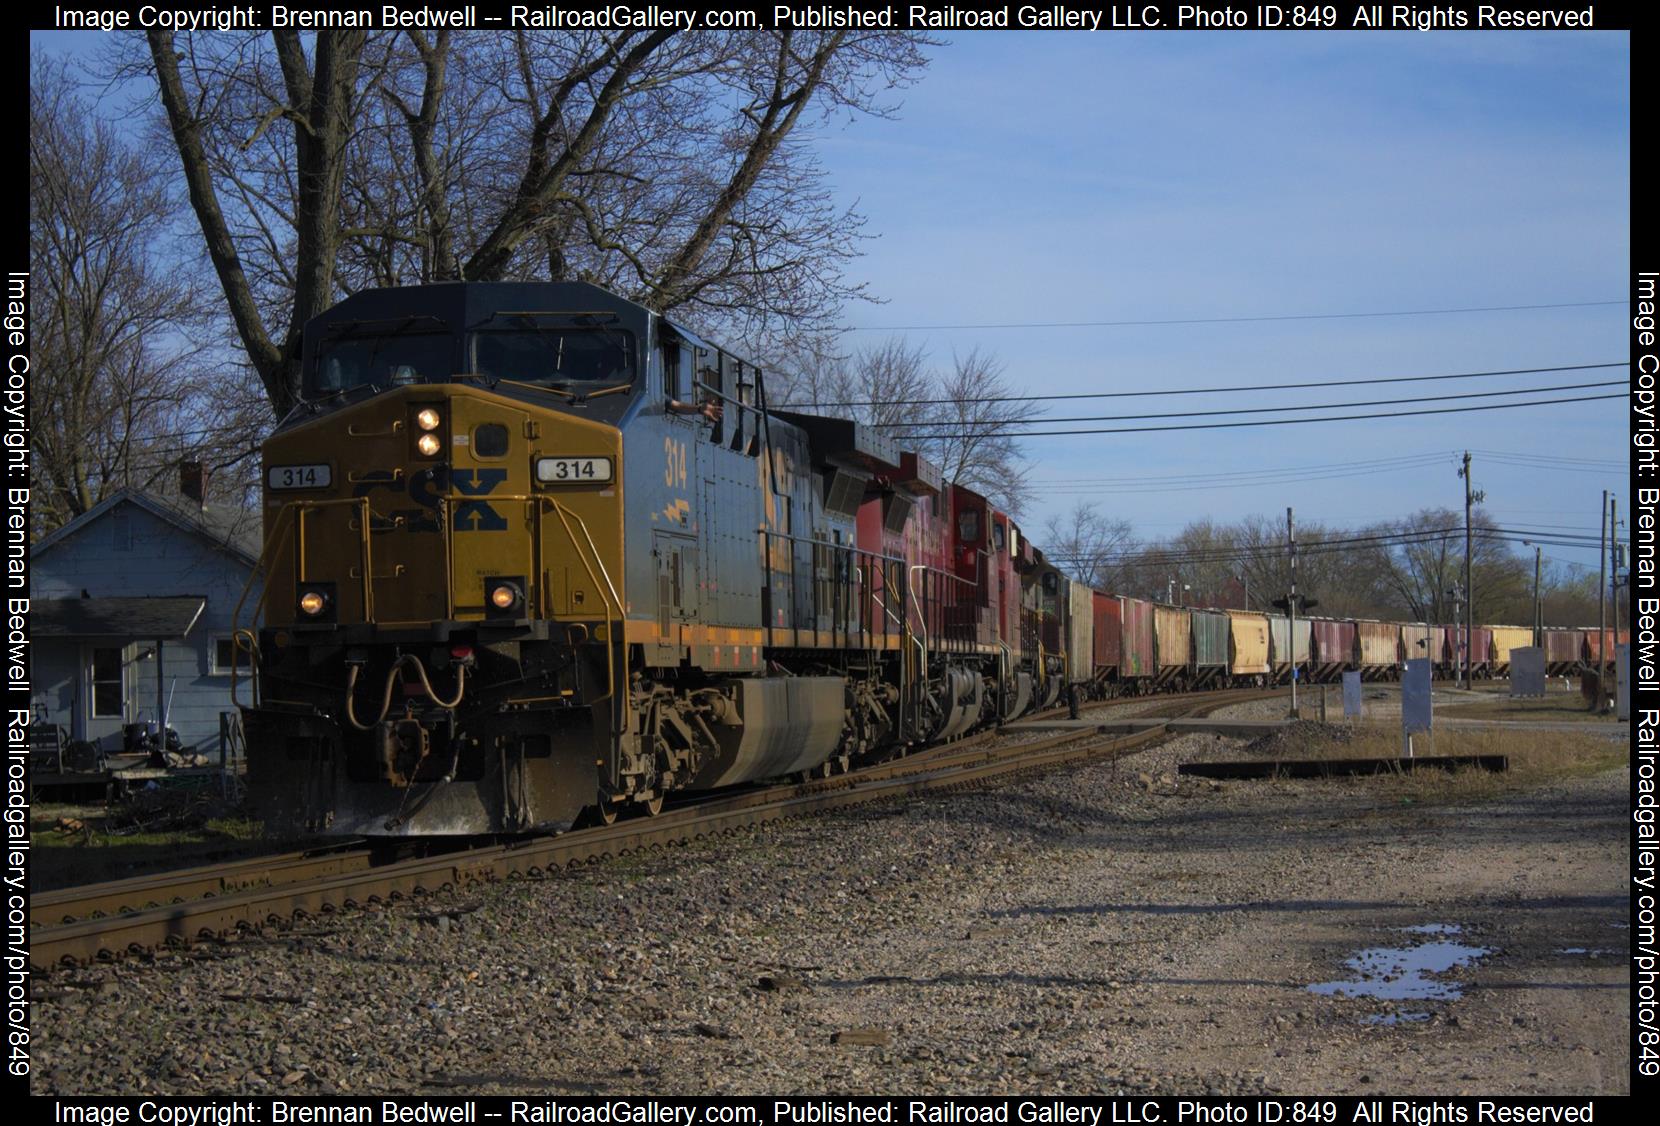 CSX 314 is a class AC44CW and  is pictured in Vincennes, Indiana, United States.  This was taken along the CE&D Subdivision  on the CSX Transportation. Photo Copyright: Brennan Bedwell uploaded to Railroad Gallery on 03/16/2023. This photograph of CSX 314 was taken on Sunday, March 05, 2023. All Rights Reserved. 